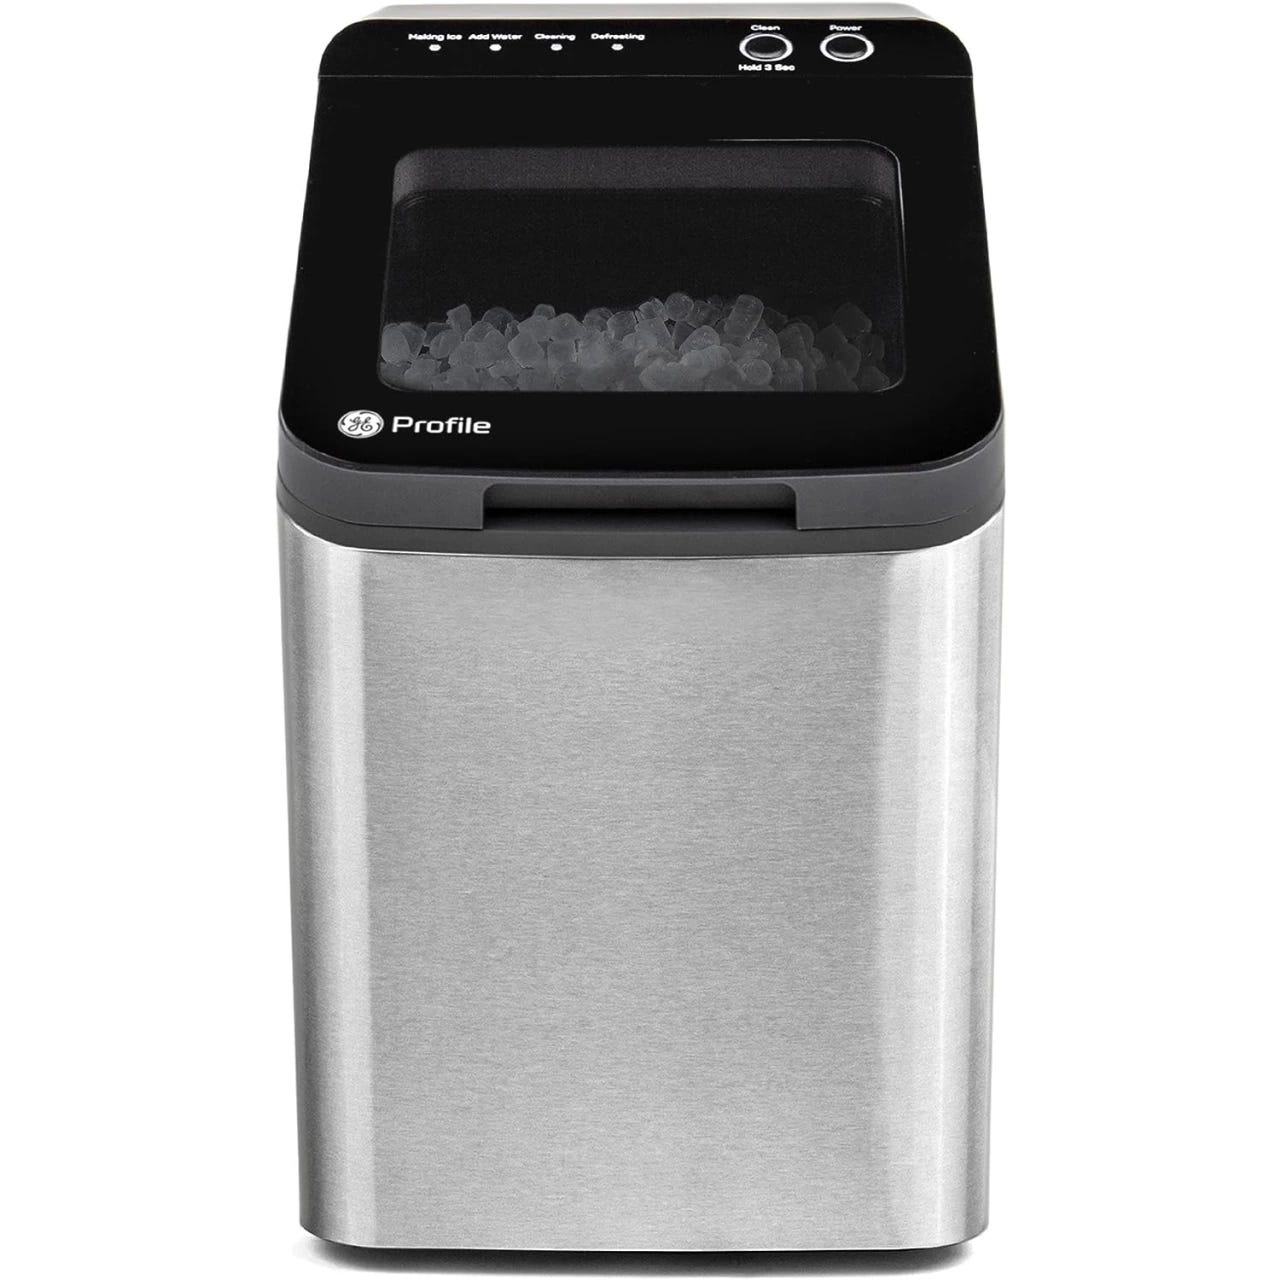 CROWNFUL Nugget Ice Maker Portable Countertop Machine - Manual, Features &  Usage Guide